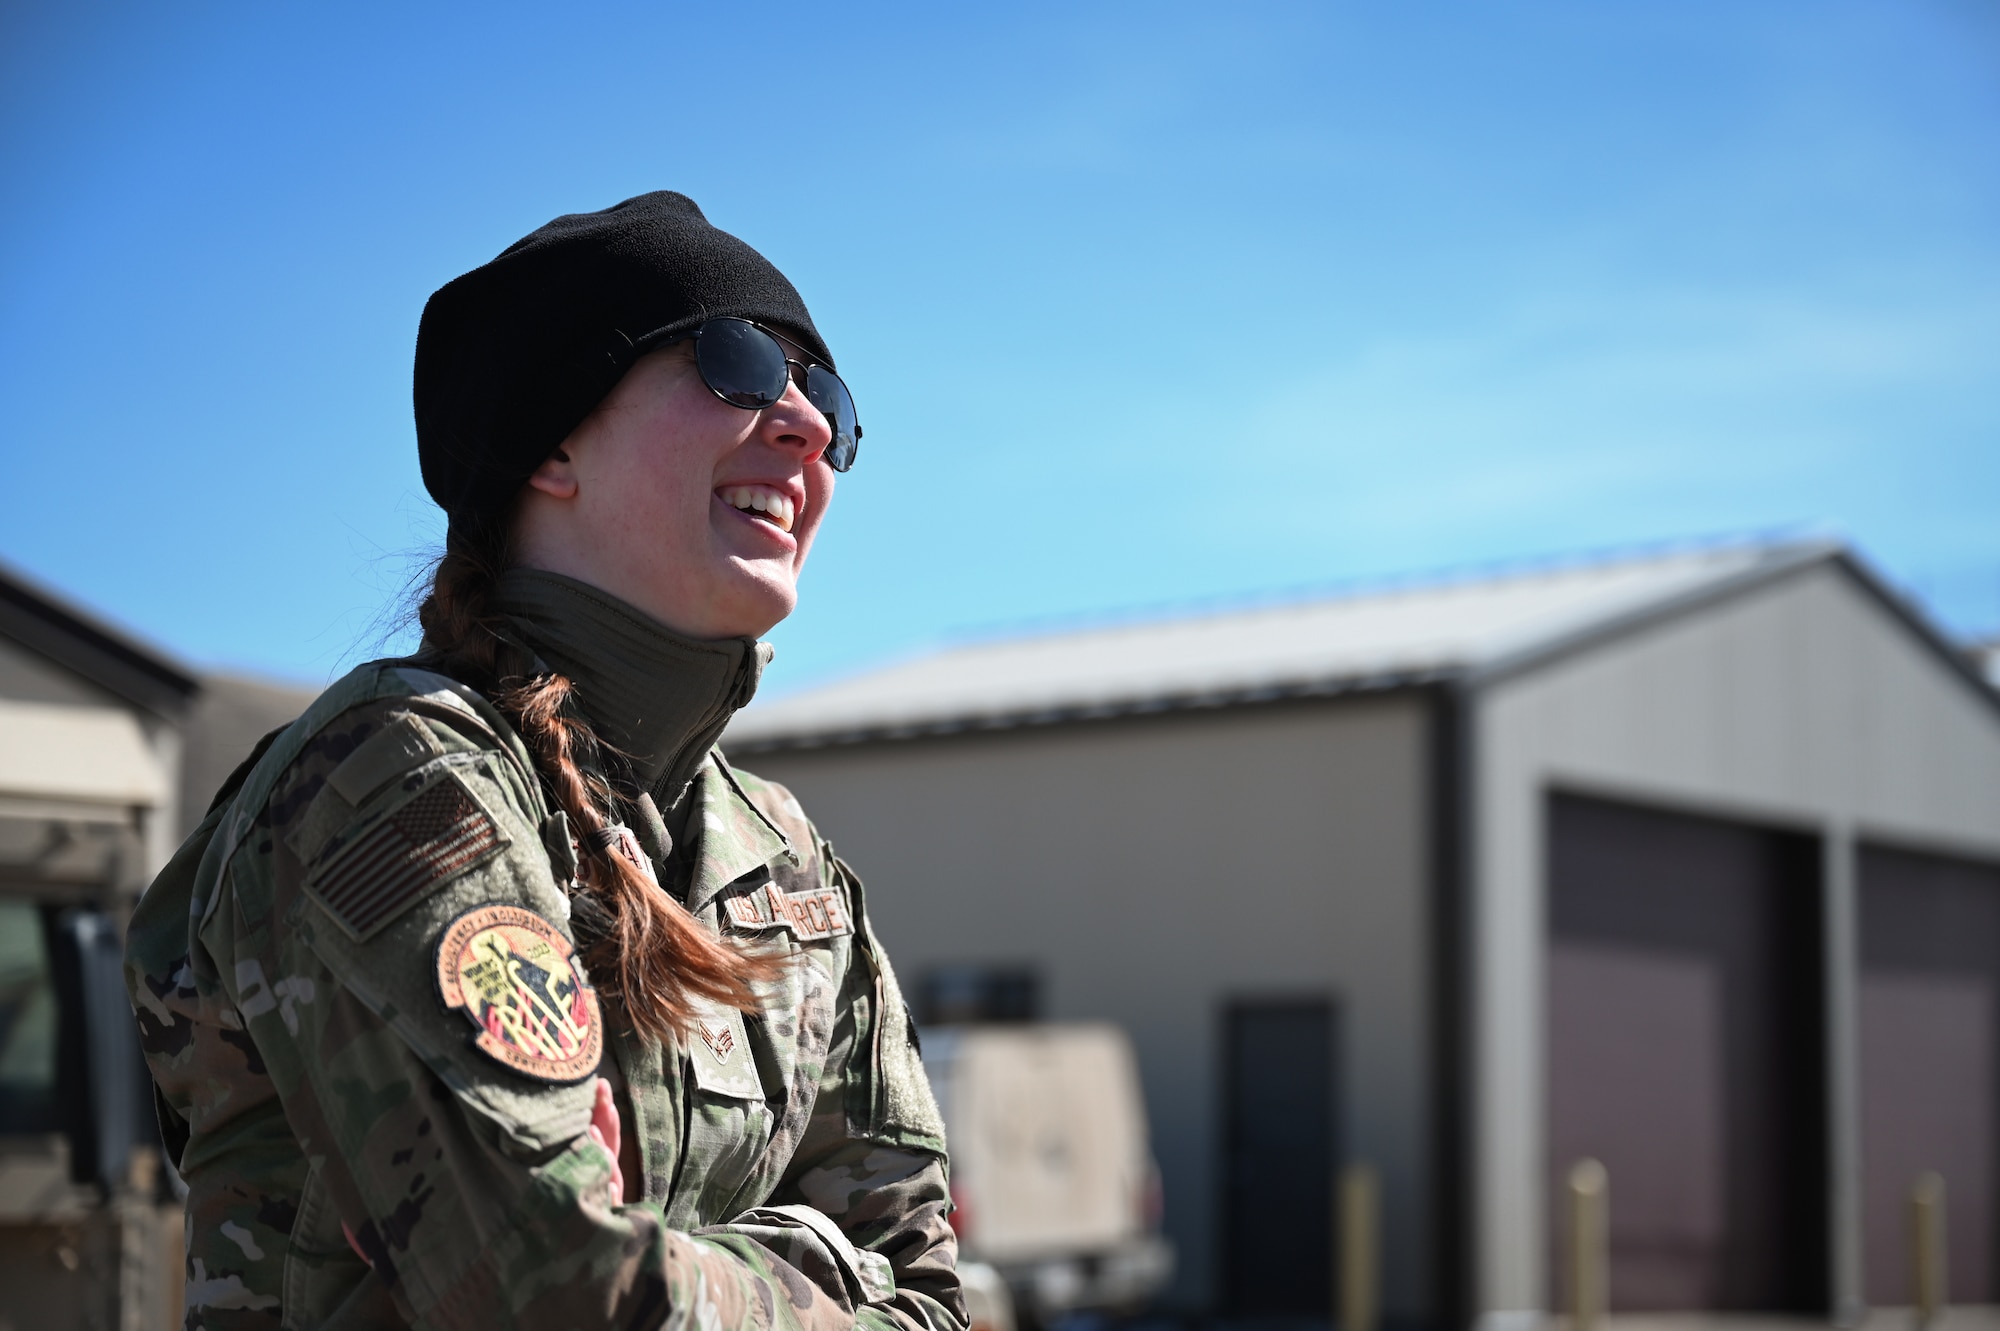 A woman in military uniform smiles towards the upper right hand corner of the image.